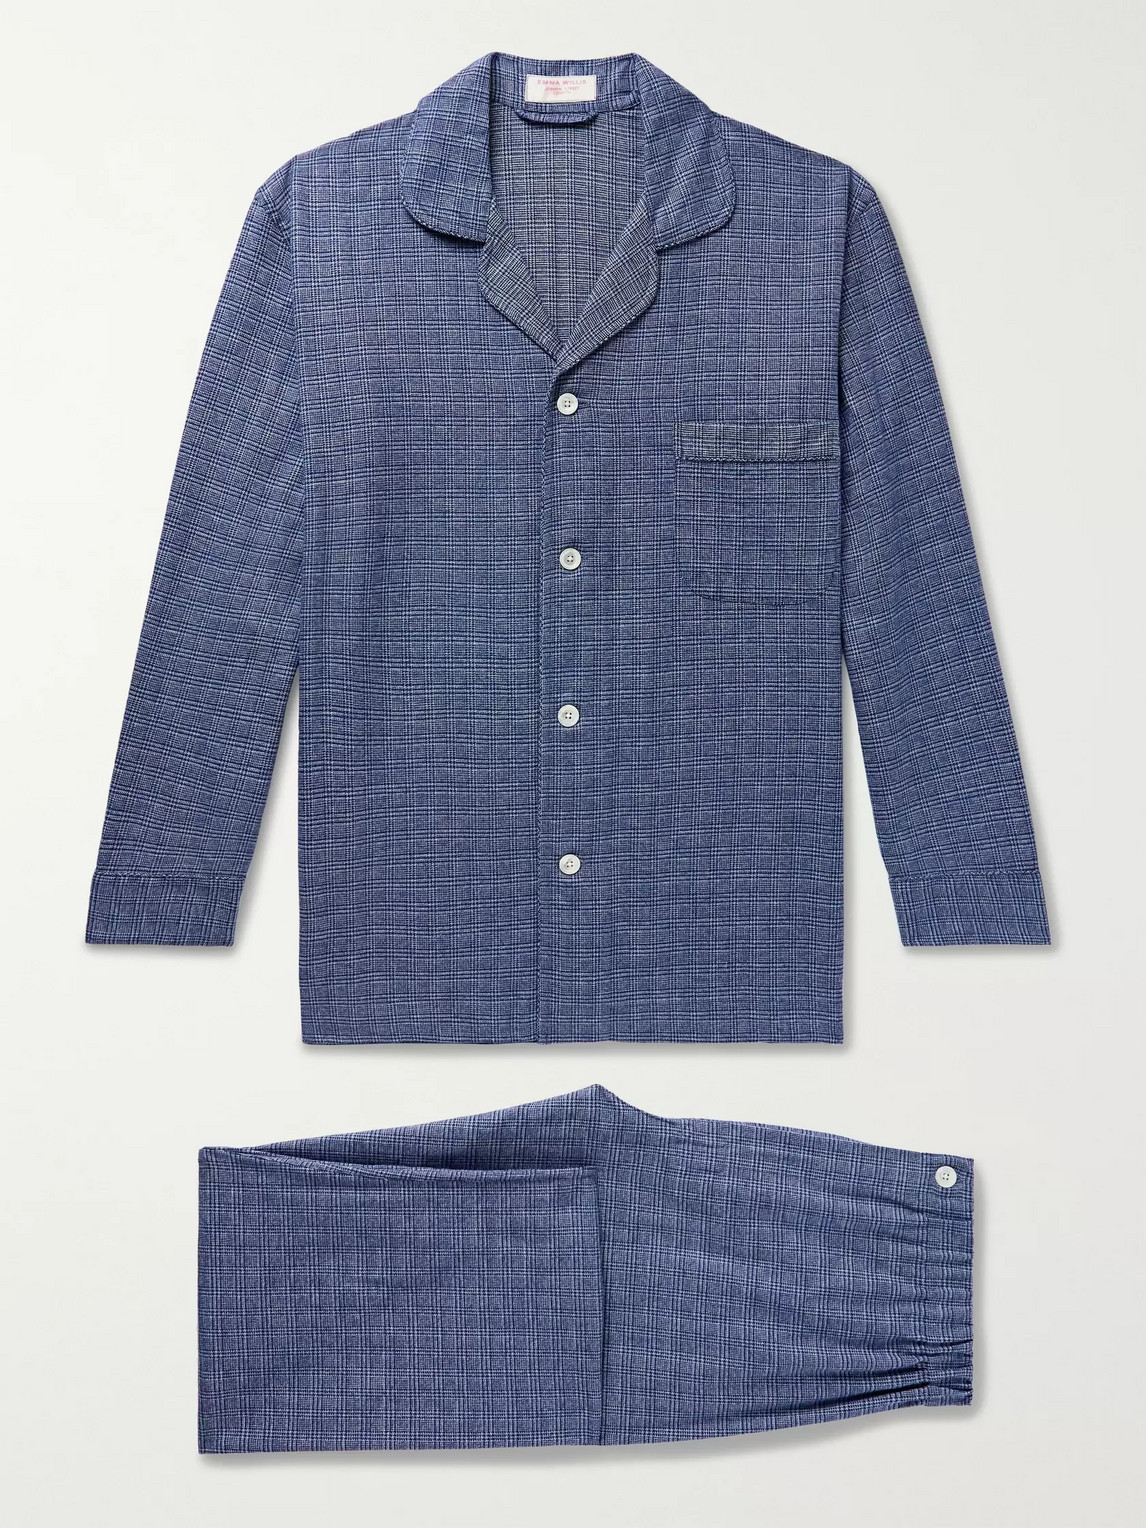 Emma Willis Prince Of Wales Checked Cotton Pyjama Set In Blue